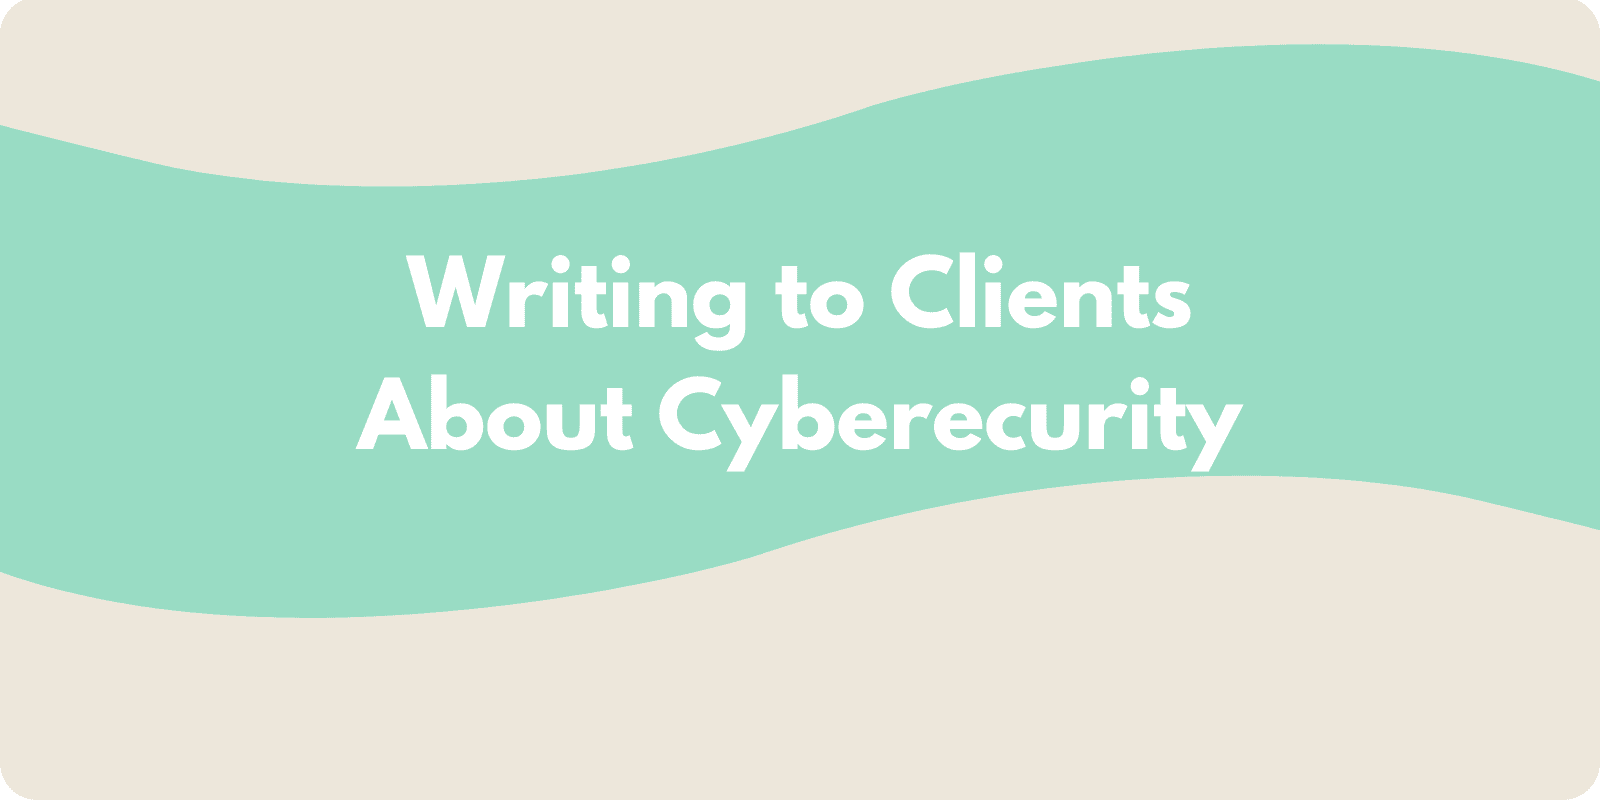 Writing to Clients About Cybersecurity 